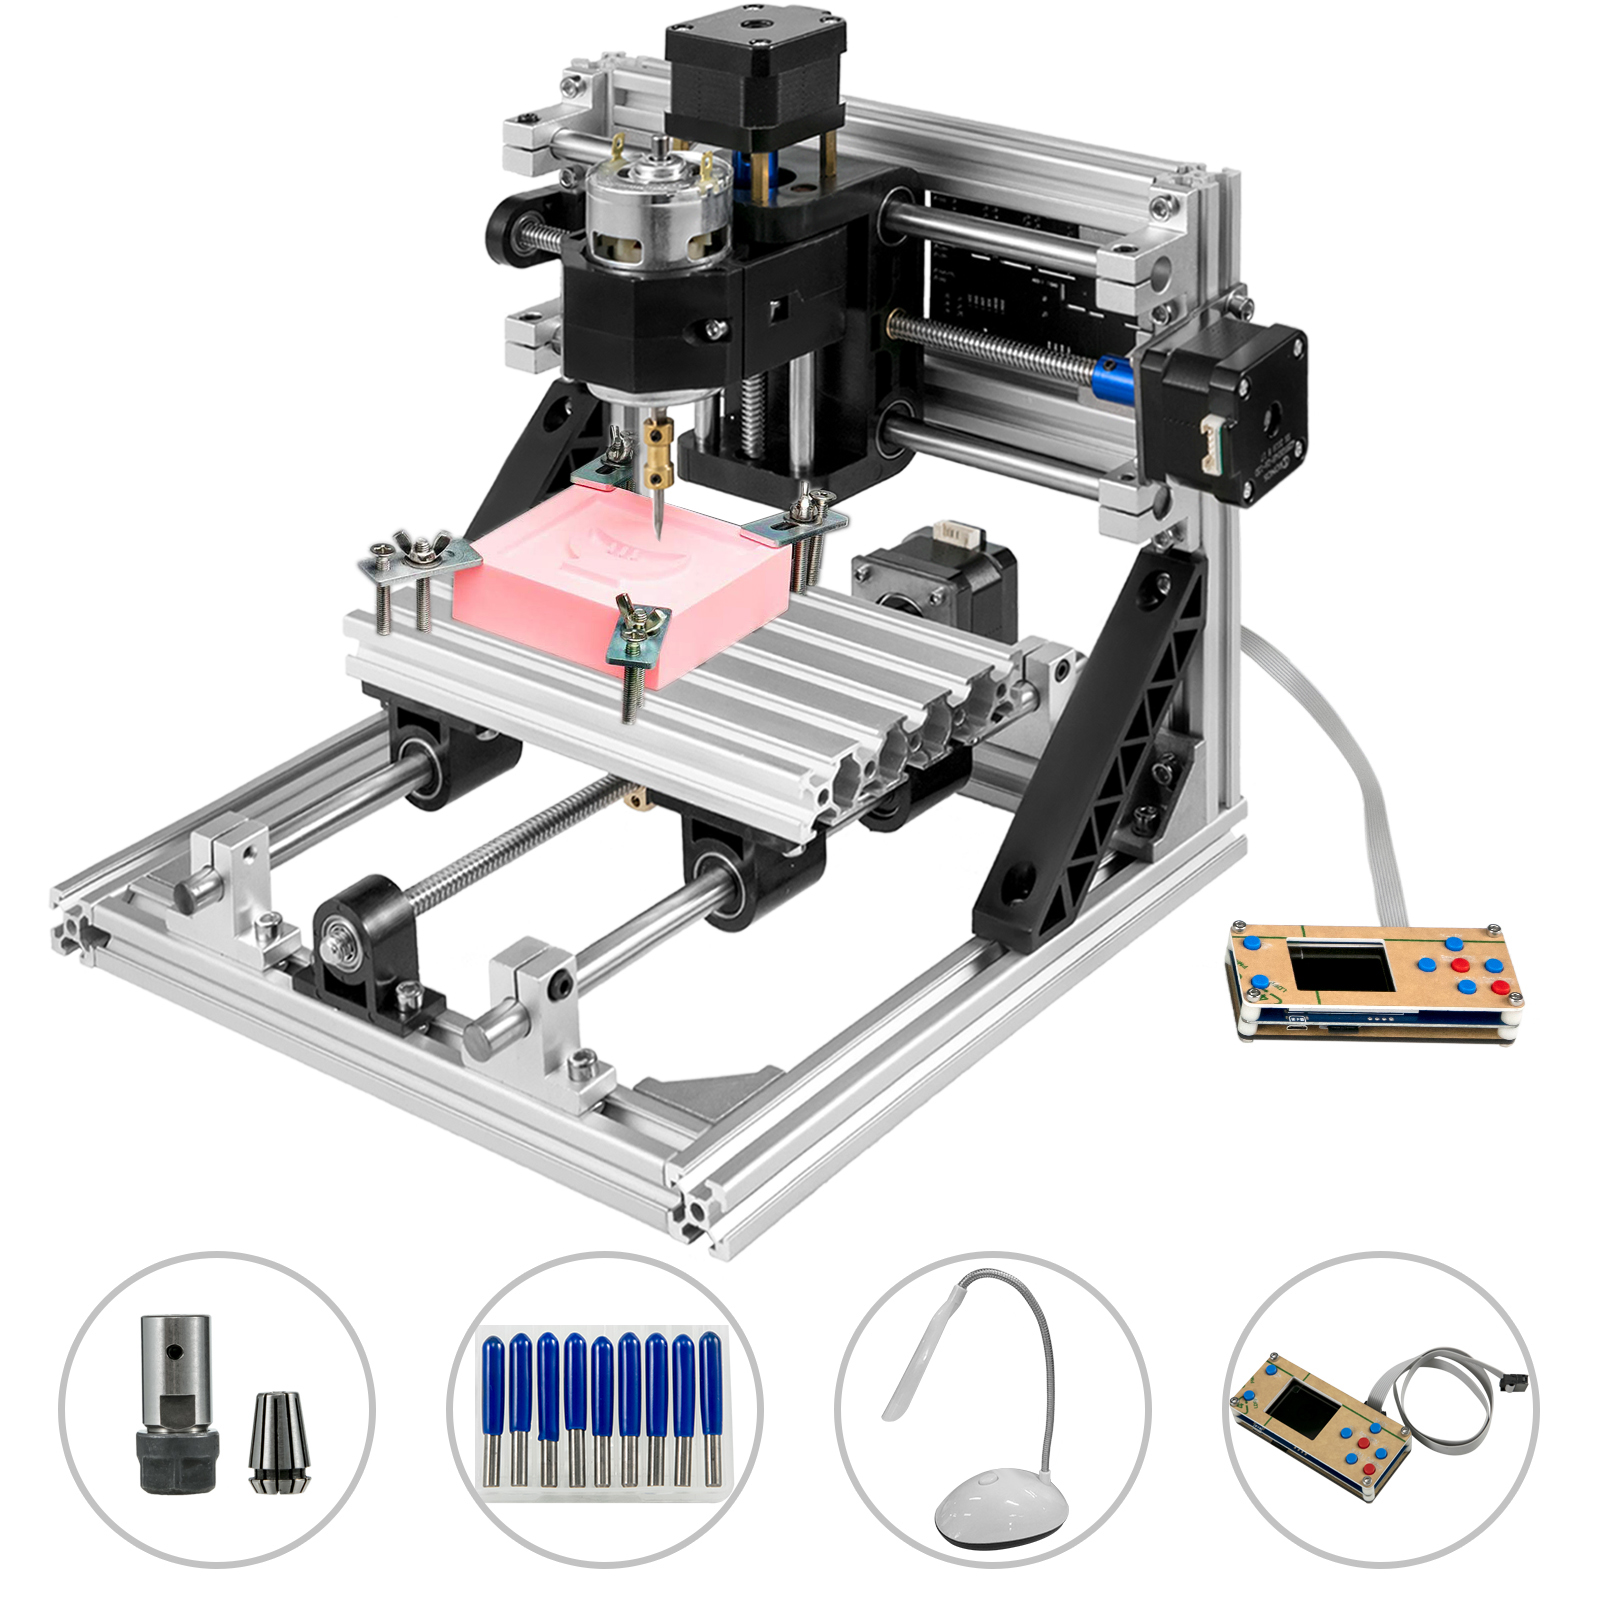 3 Axis Cnc Router 1610 With Offline Controller Engraver Machine Wood Plastic Pvc от Vevor Many GEOs